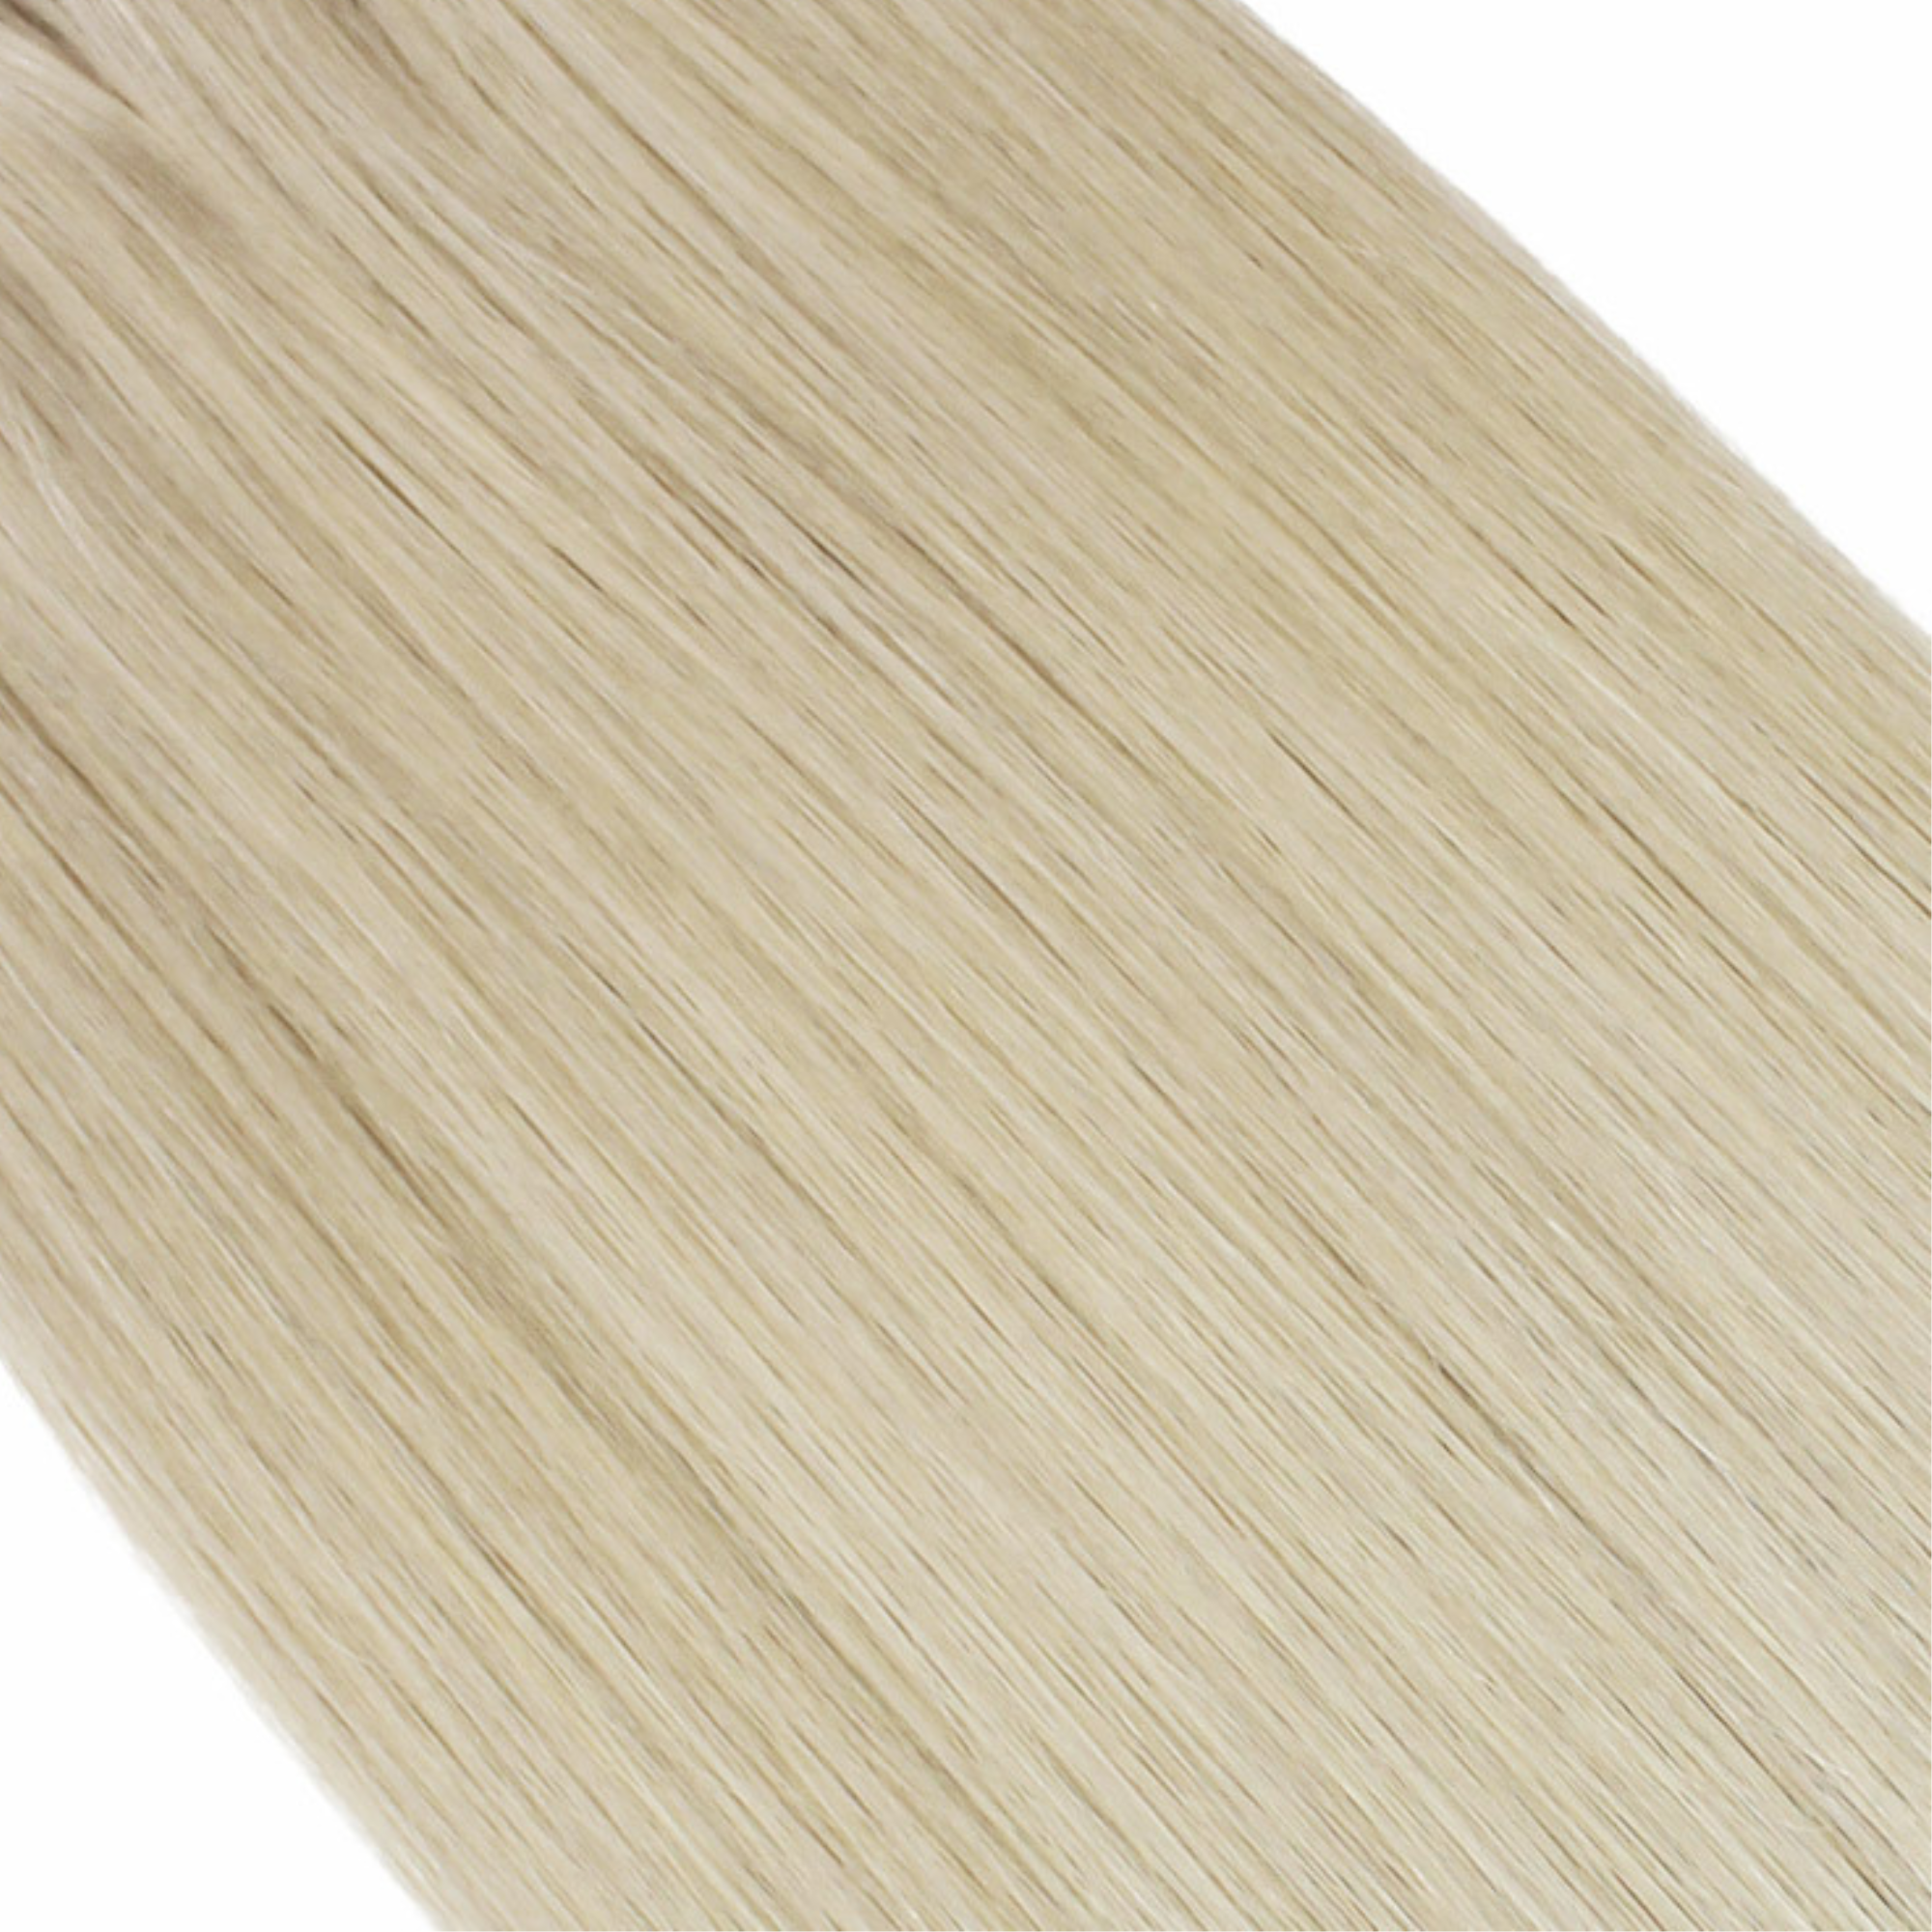 "hair rehab london 22" weft hair extensions shade swatch titled ice blonde"